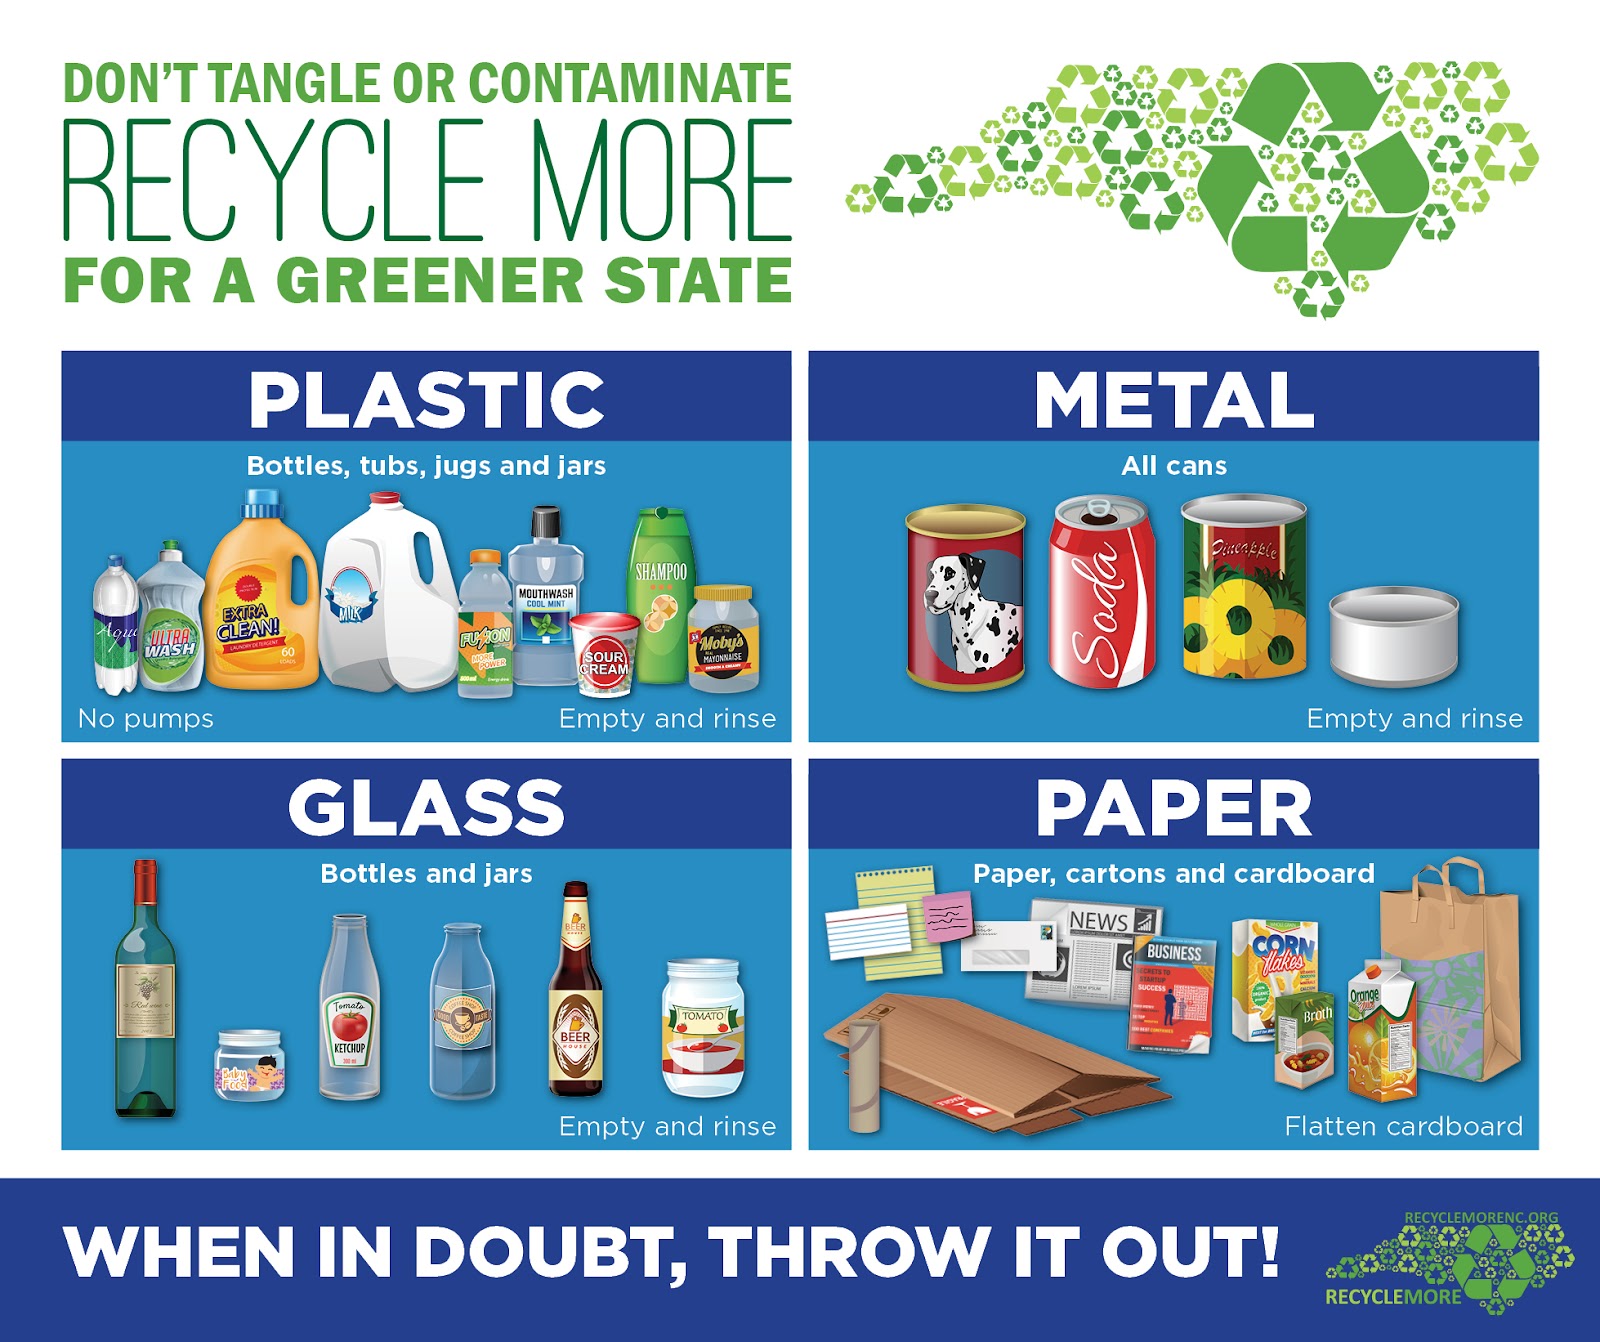 Recycling Guide from Recycle Right North Carolina